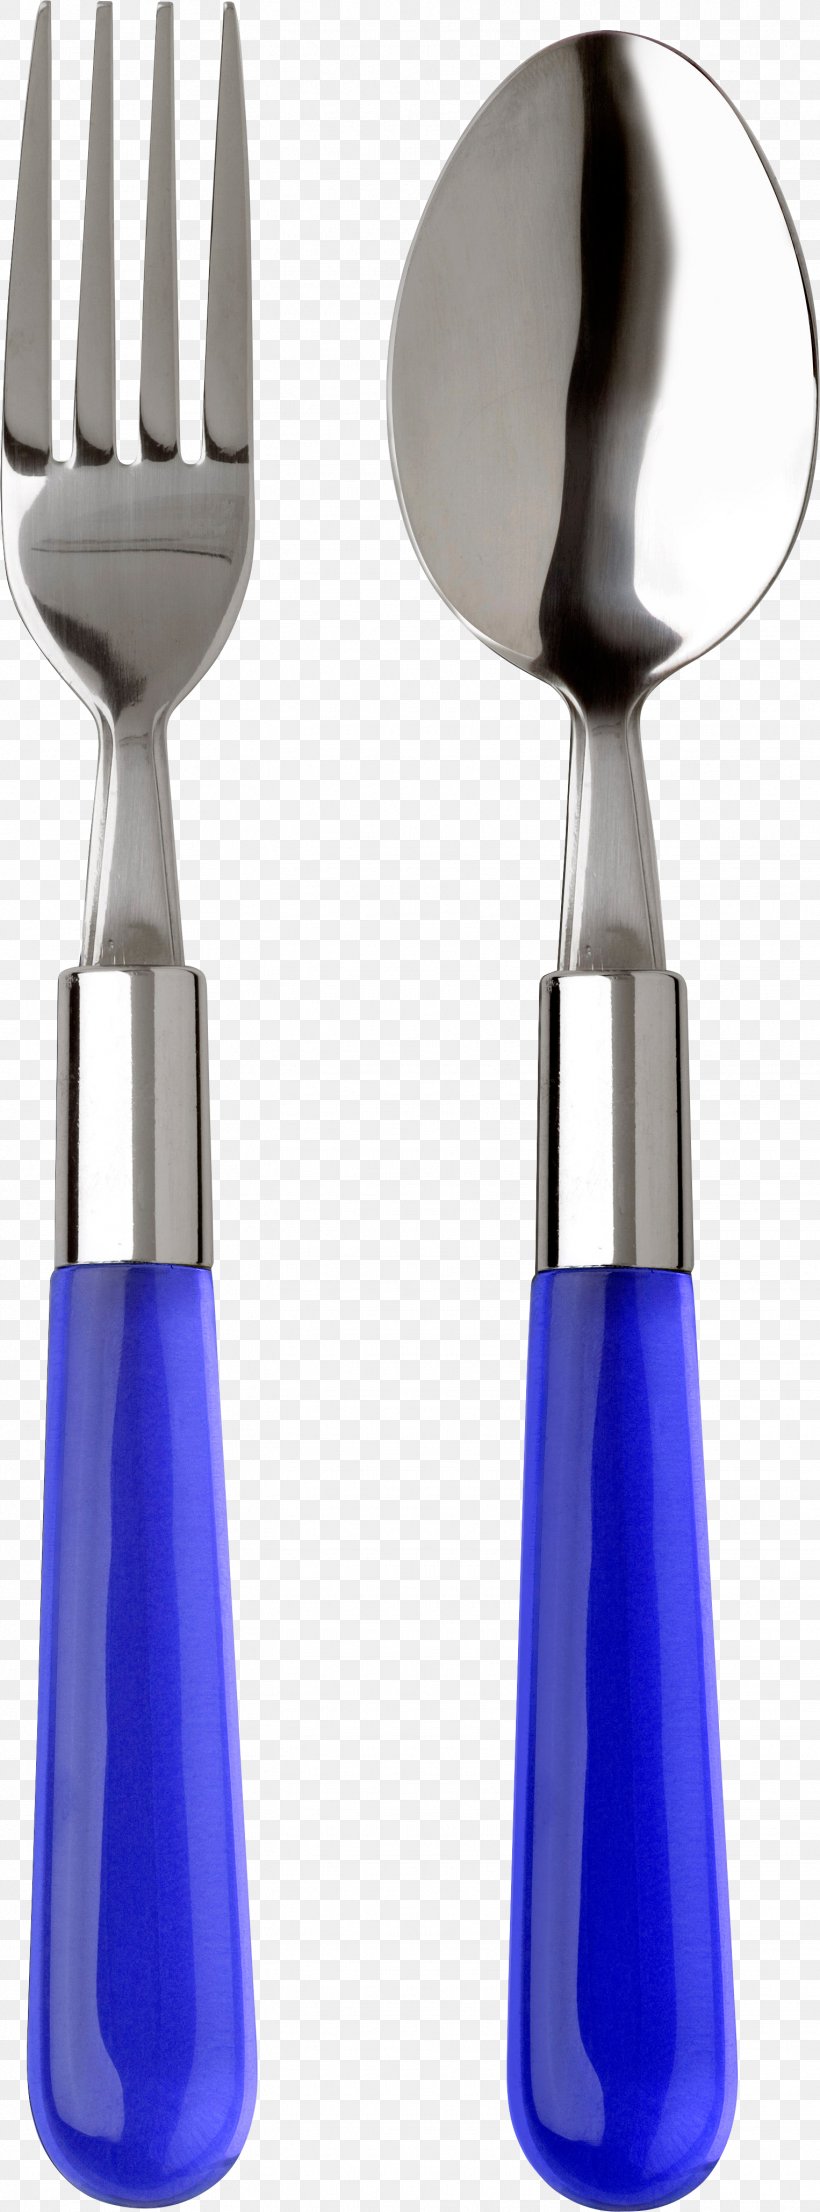 Fork Knife Spoon Spork, PNG, 1526x4118px, Knife, Cutlery, Fork, Product, Product Design Download Free